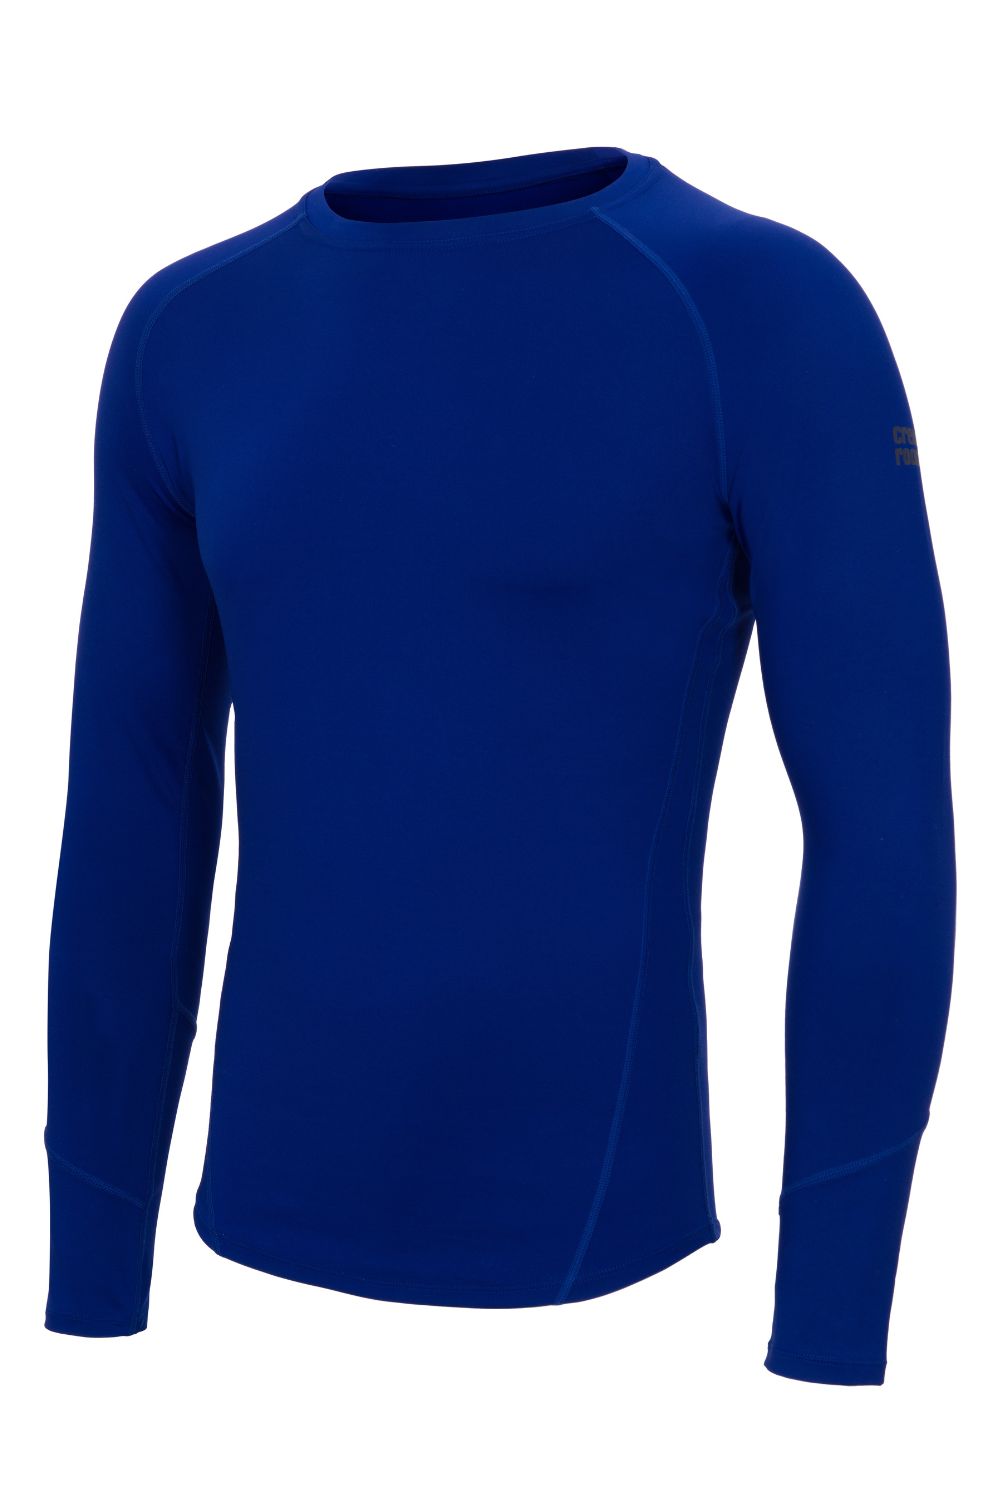 The H20 Classic Baselayer (Men's)